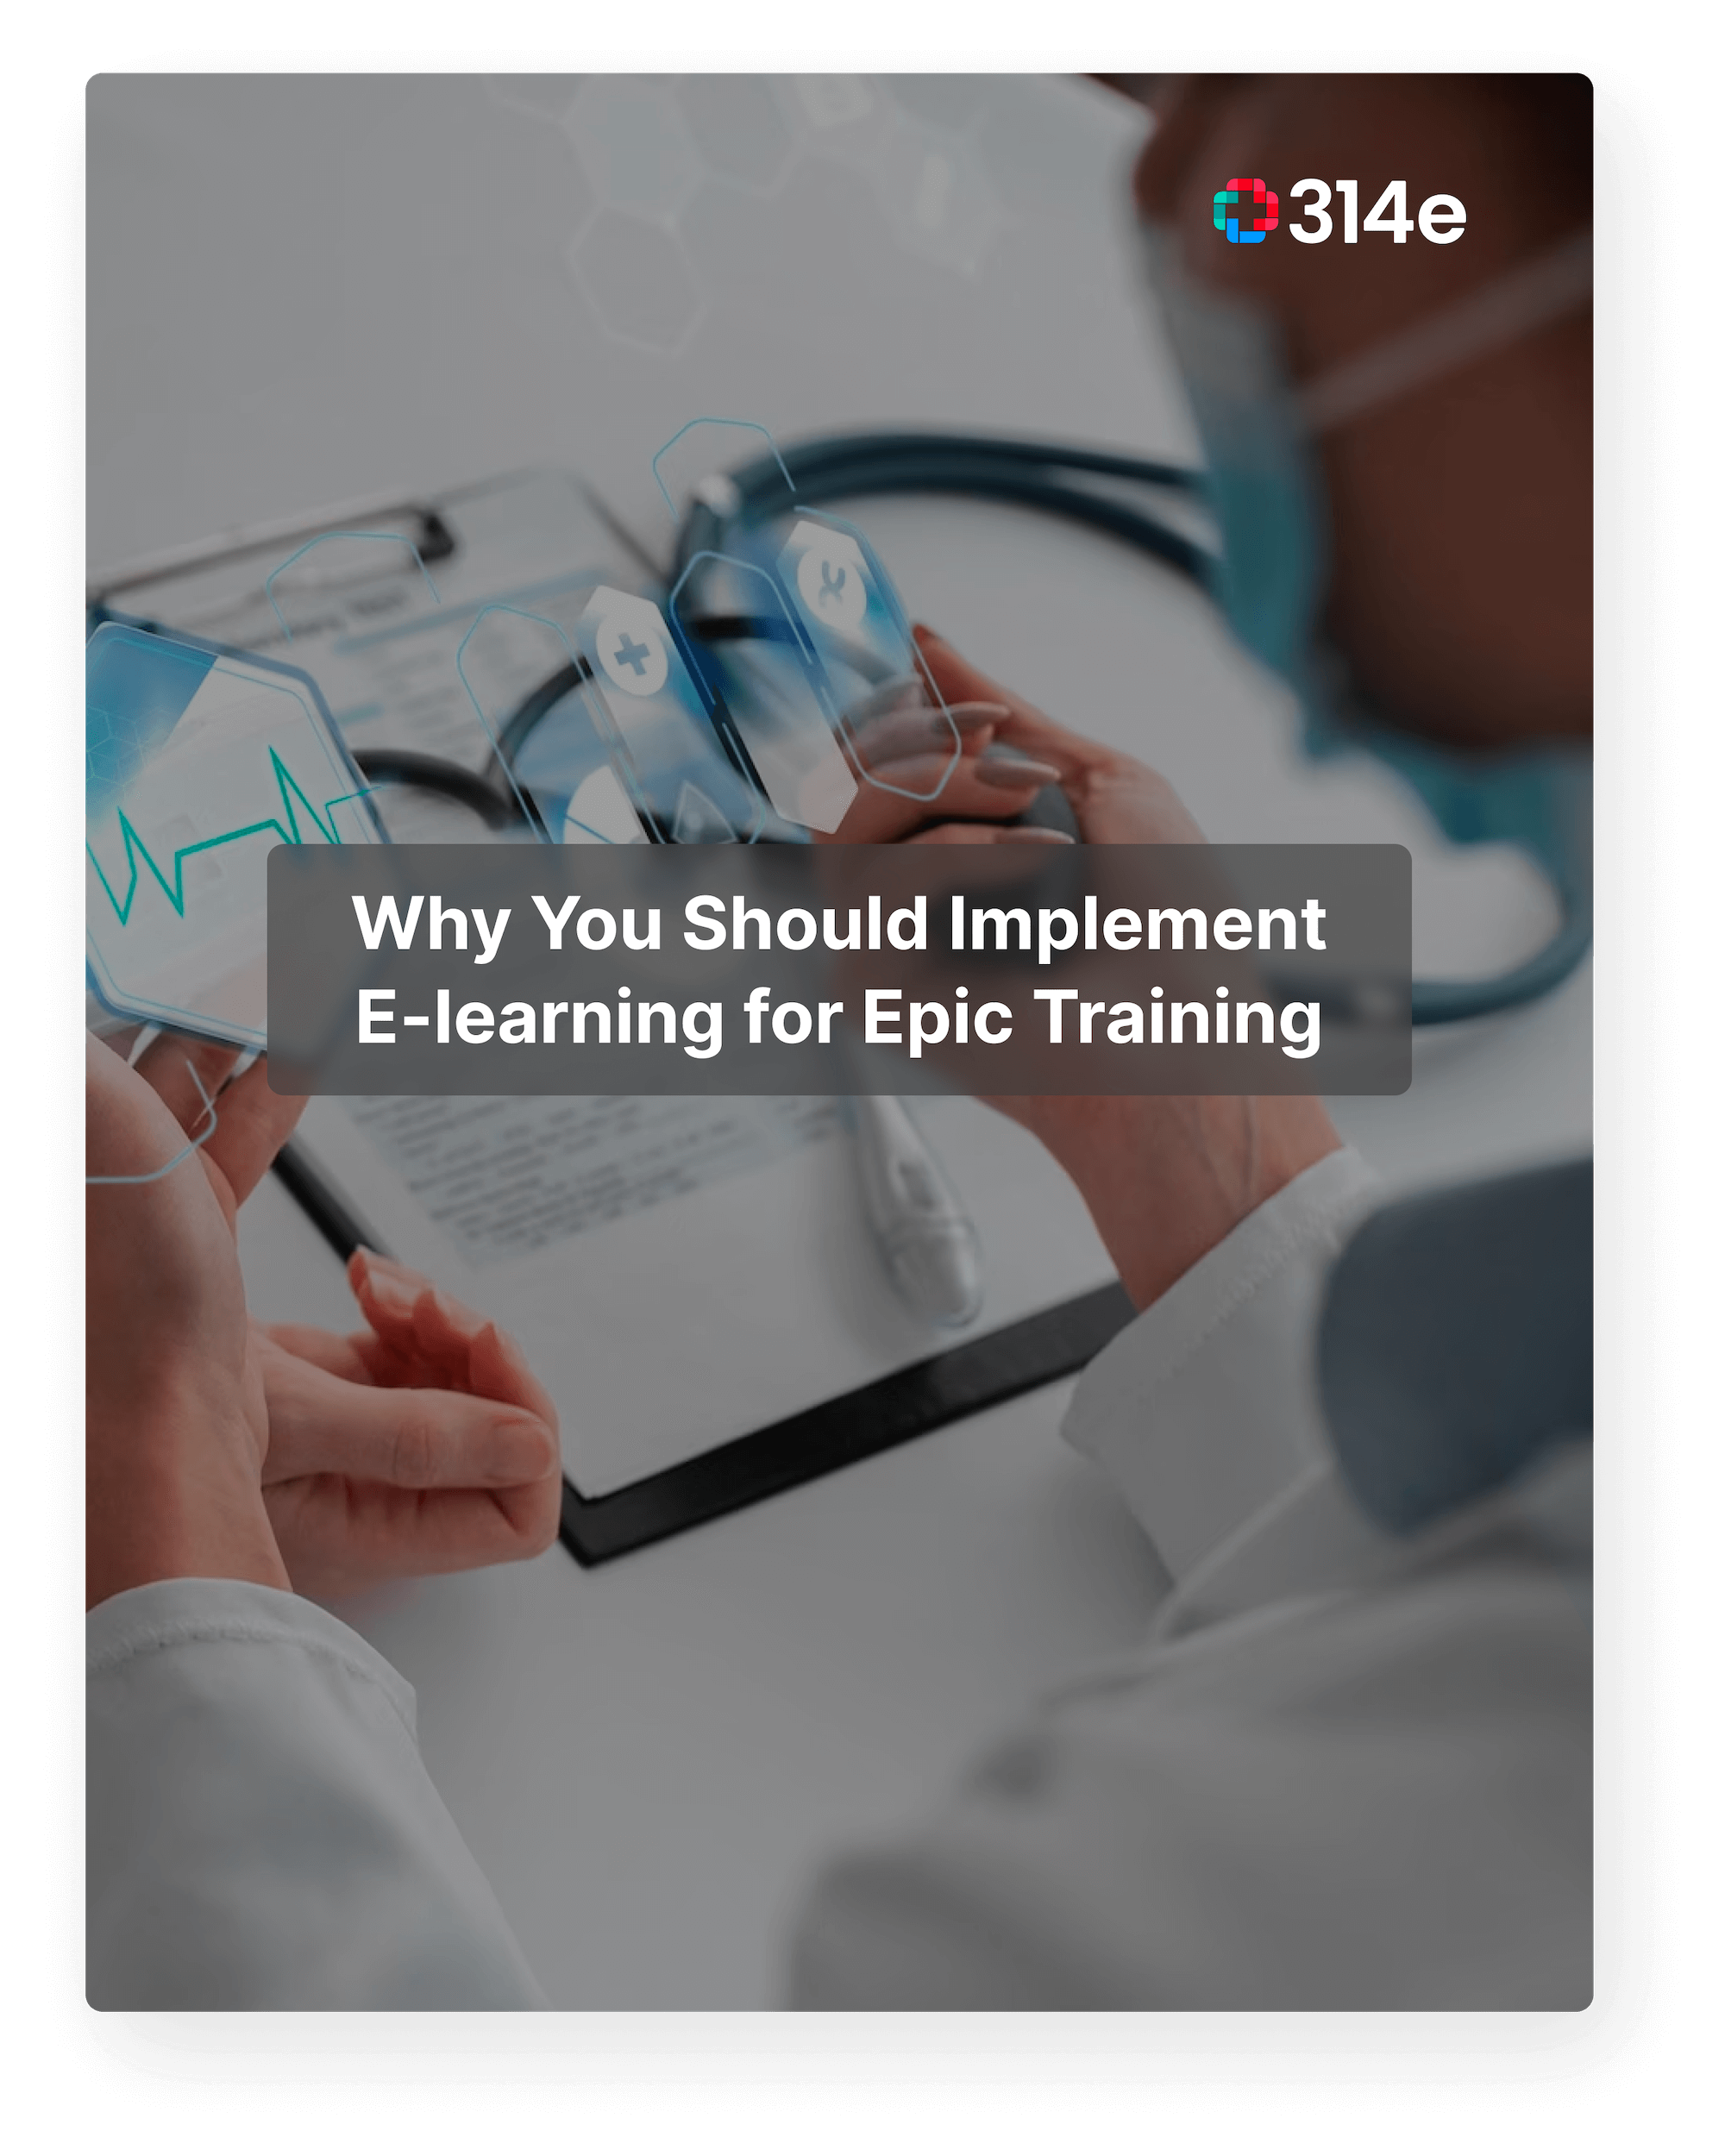 Why You Should Implement E-learning for Epic Training